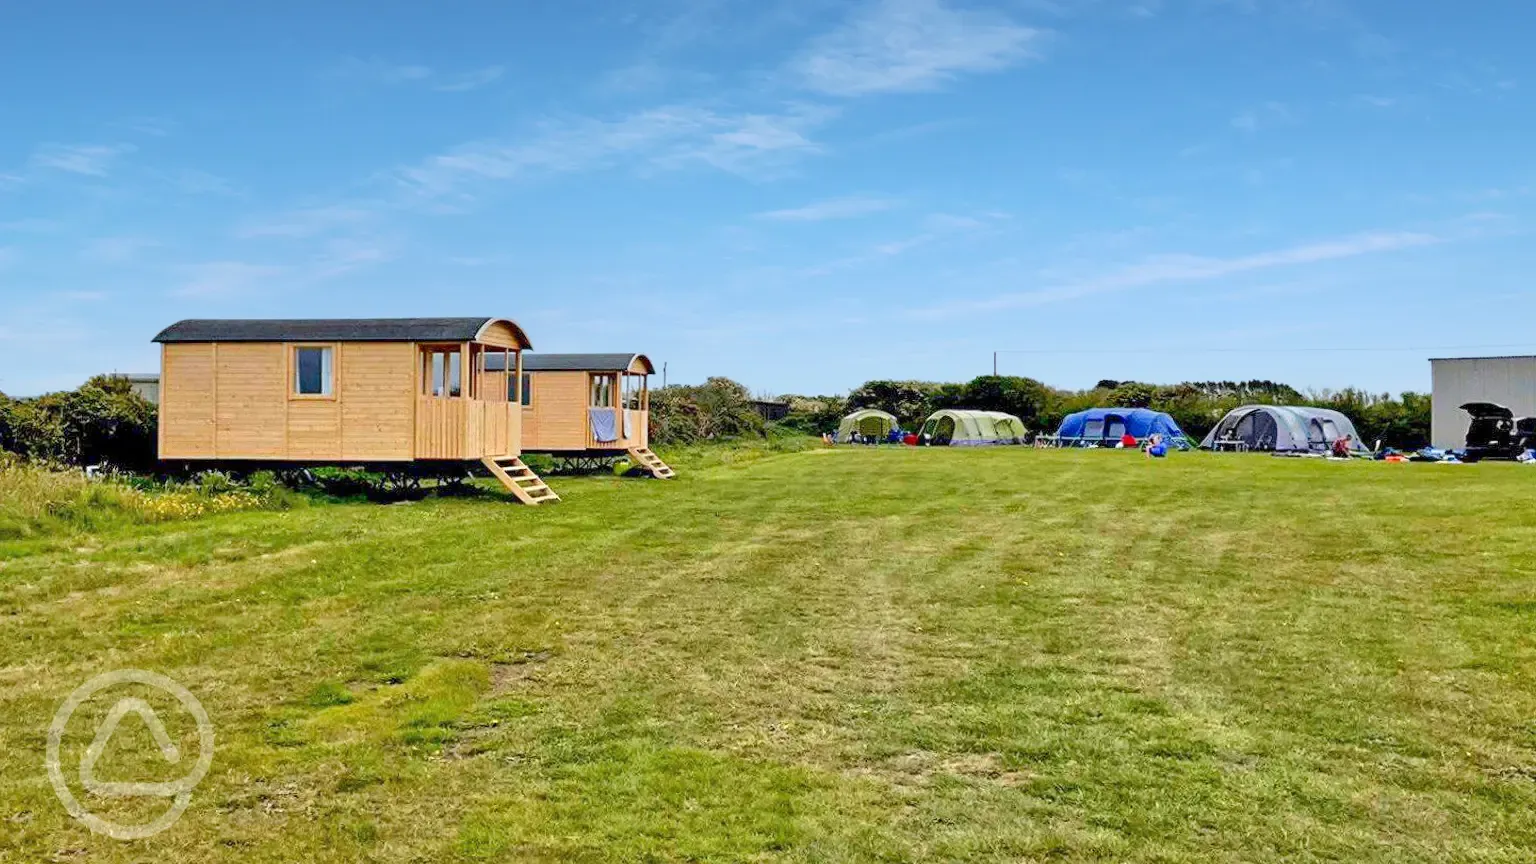 Shepherd's huts and grass pitches